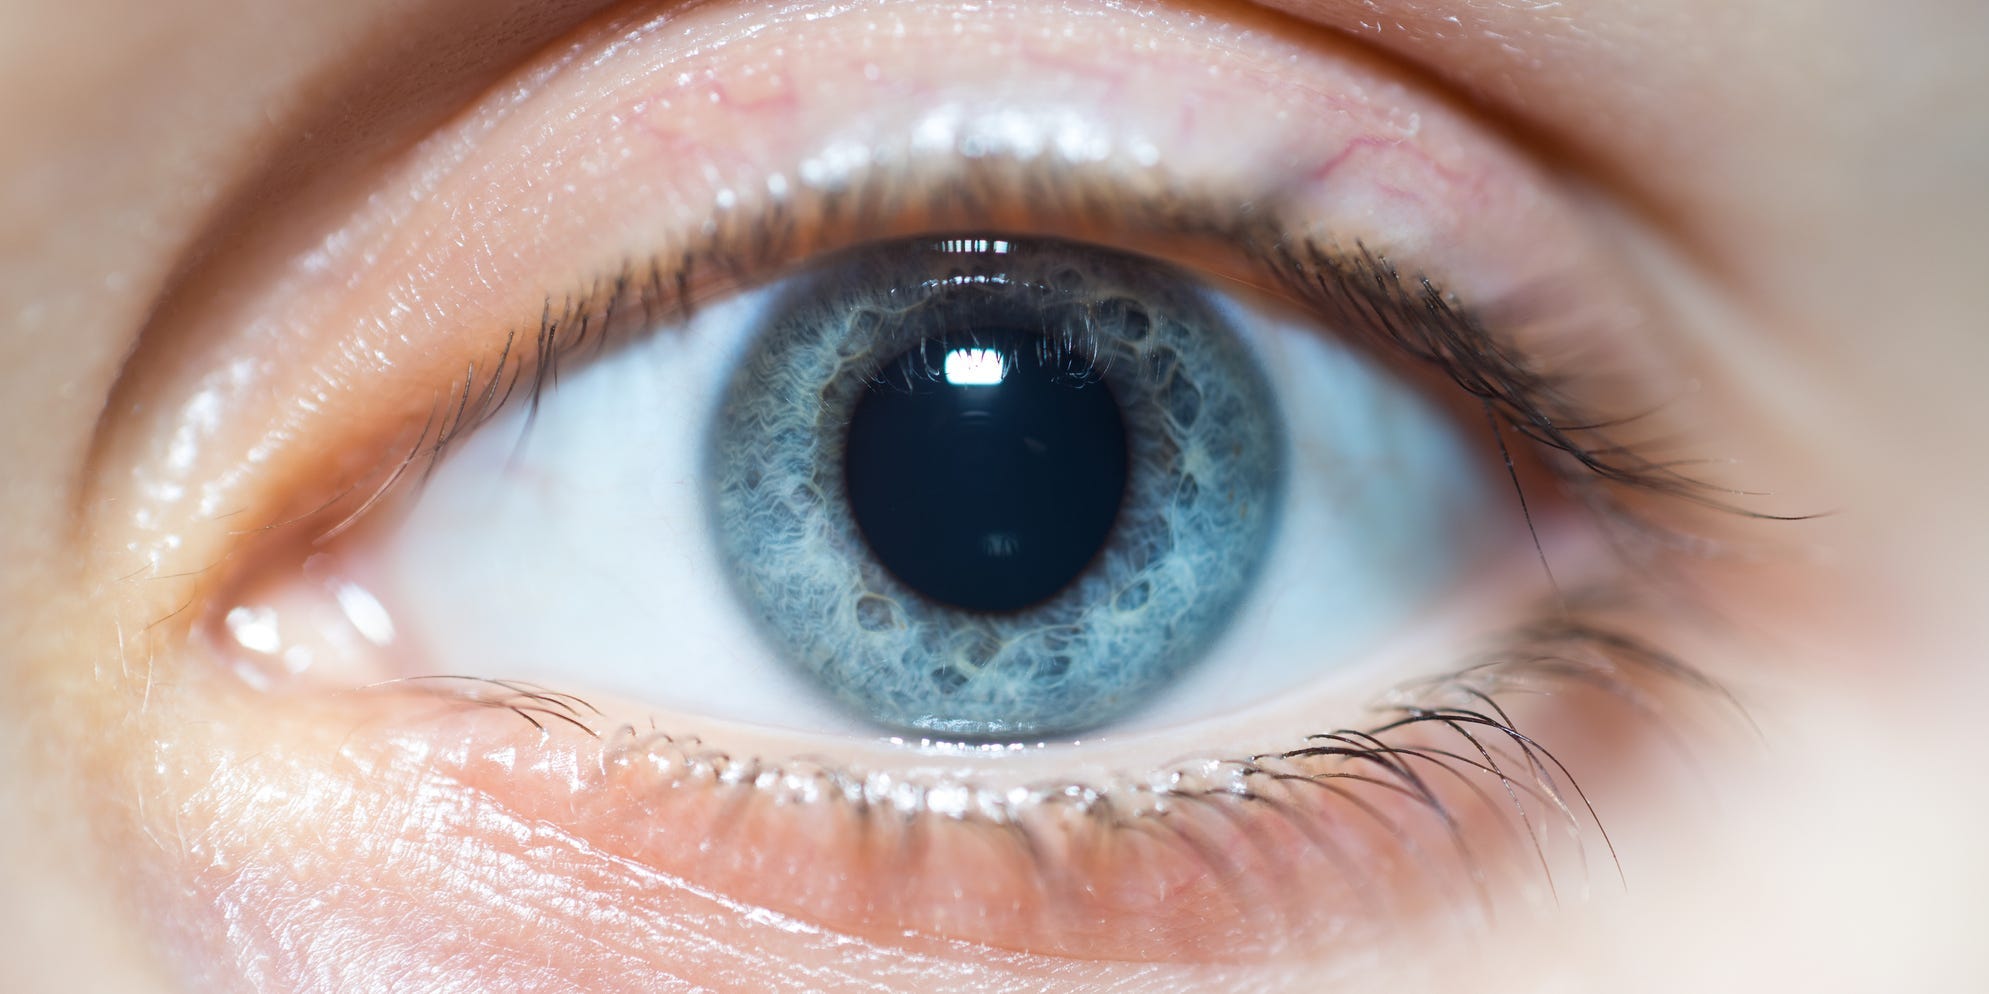 7-reasons-why-your-pupils-may-be-dilated-from-low-light-to-sexual